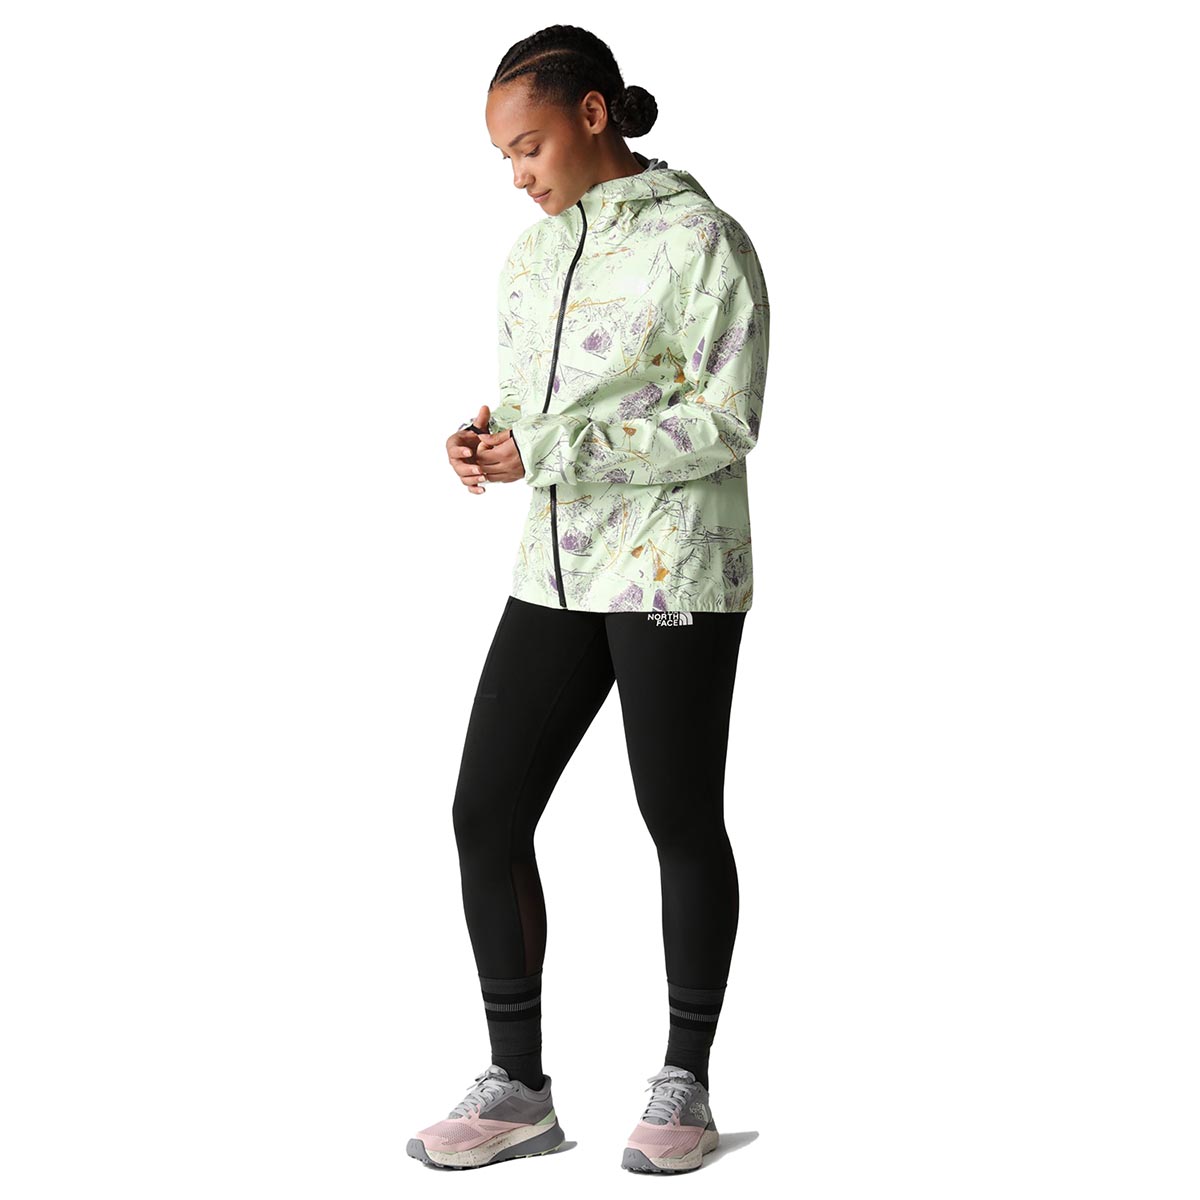 THE NORTH FACE - HIGHER RUN JACKET